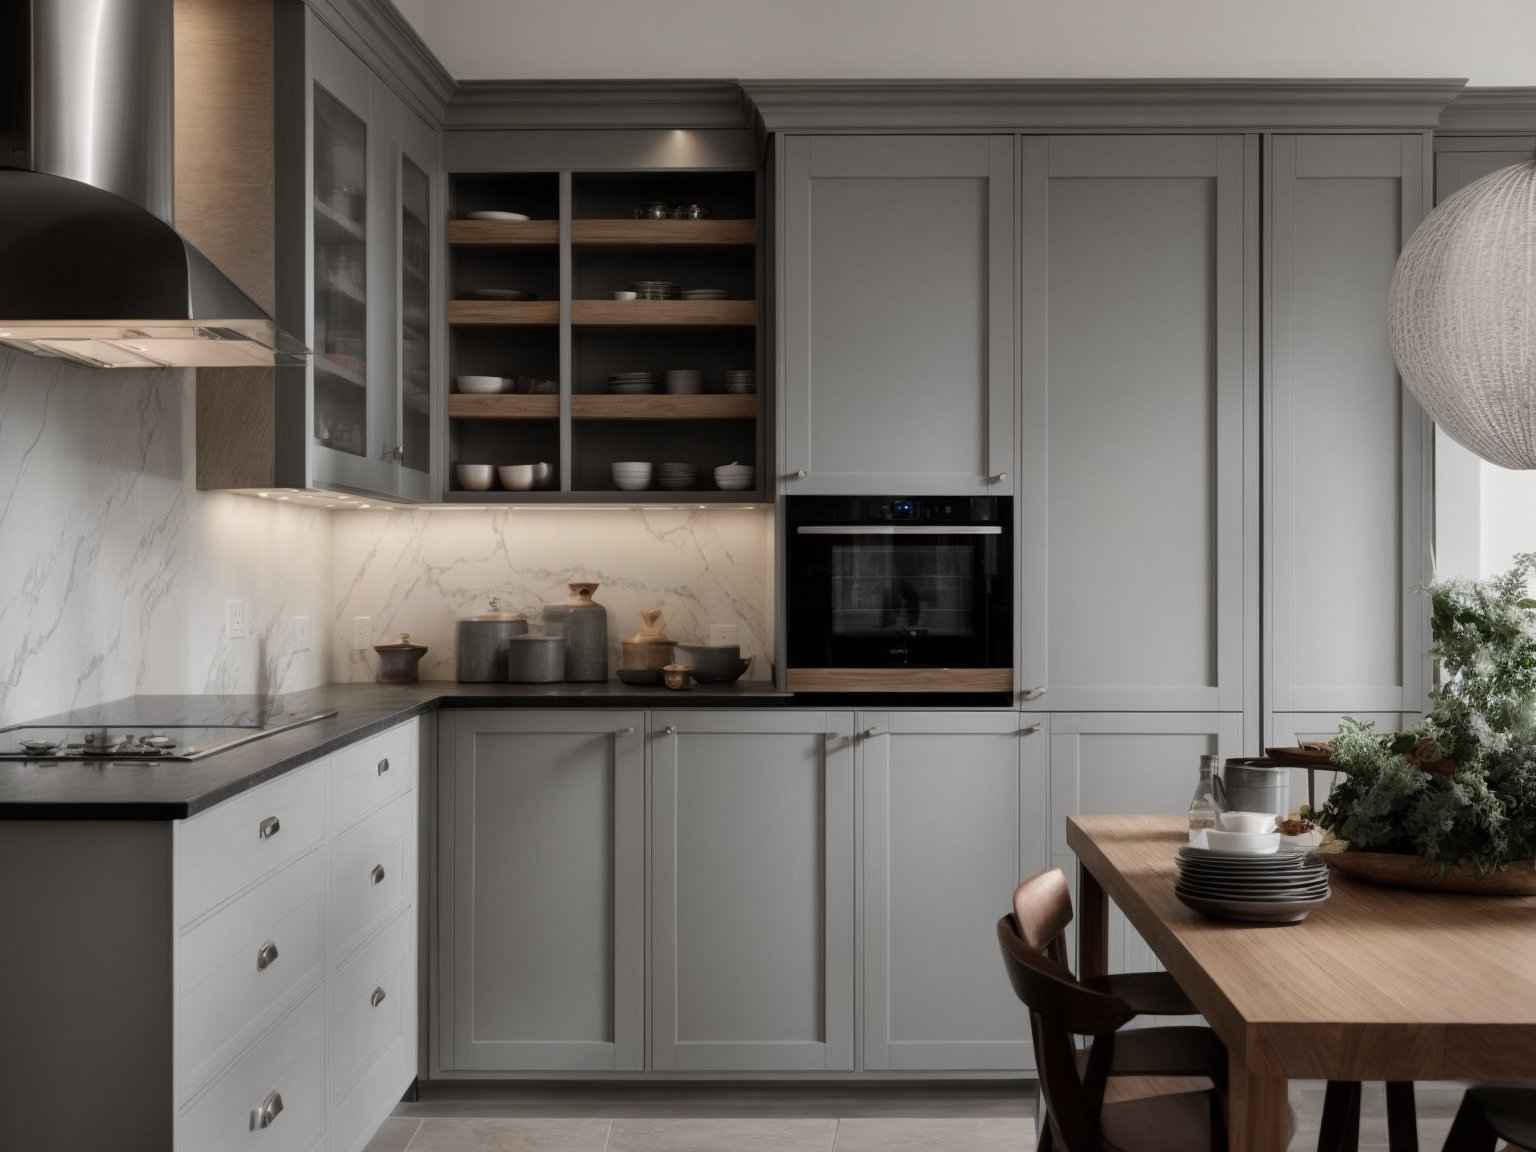 Light grey cabinetry paired with dark countertops, adding a touch of sophistication to the kitchen space